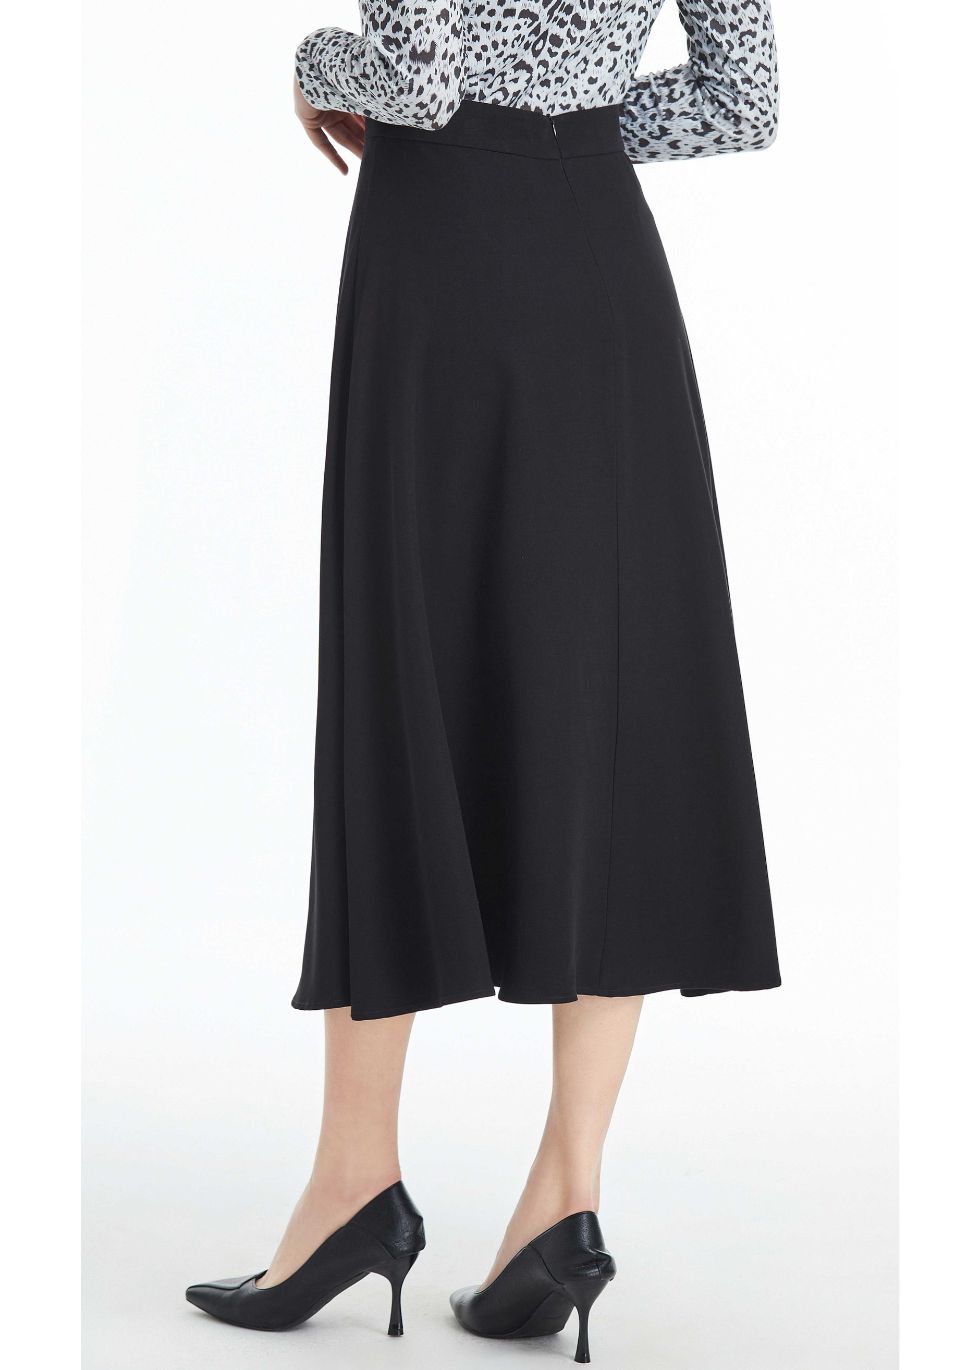 Fully Lined Black Midi Skirt with Front Button Detail